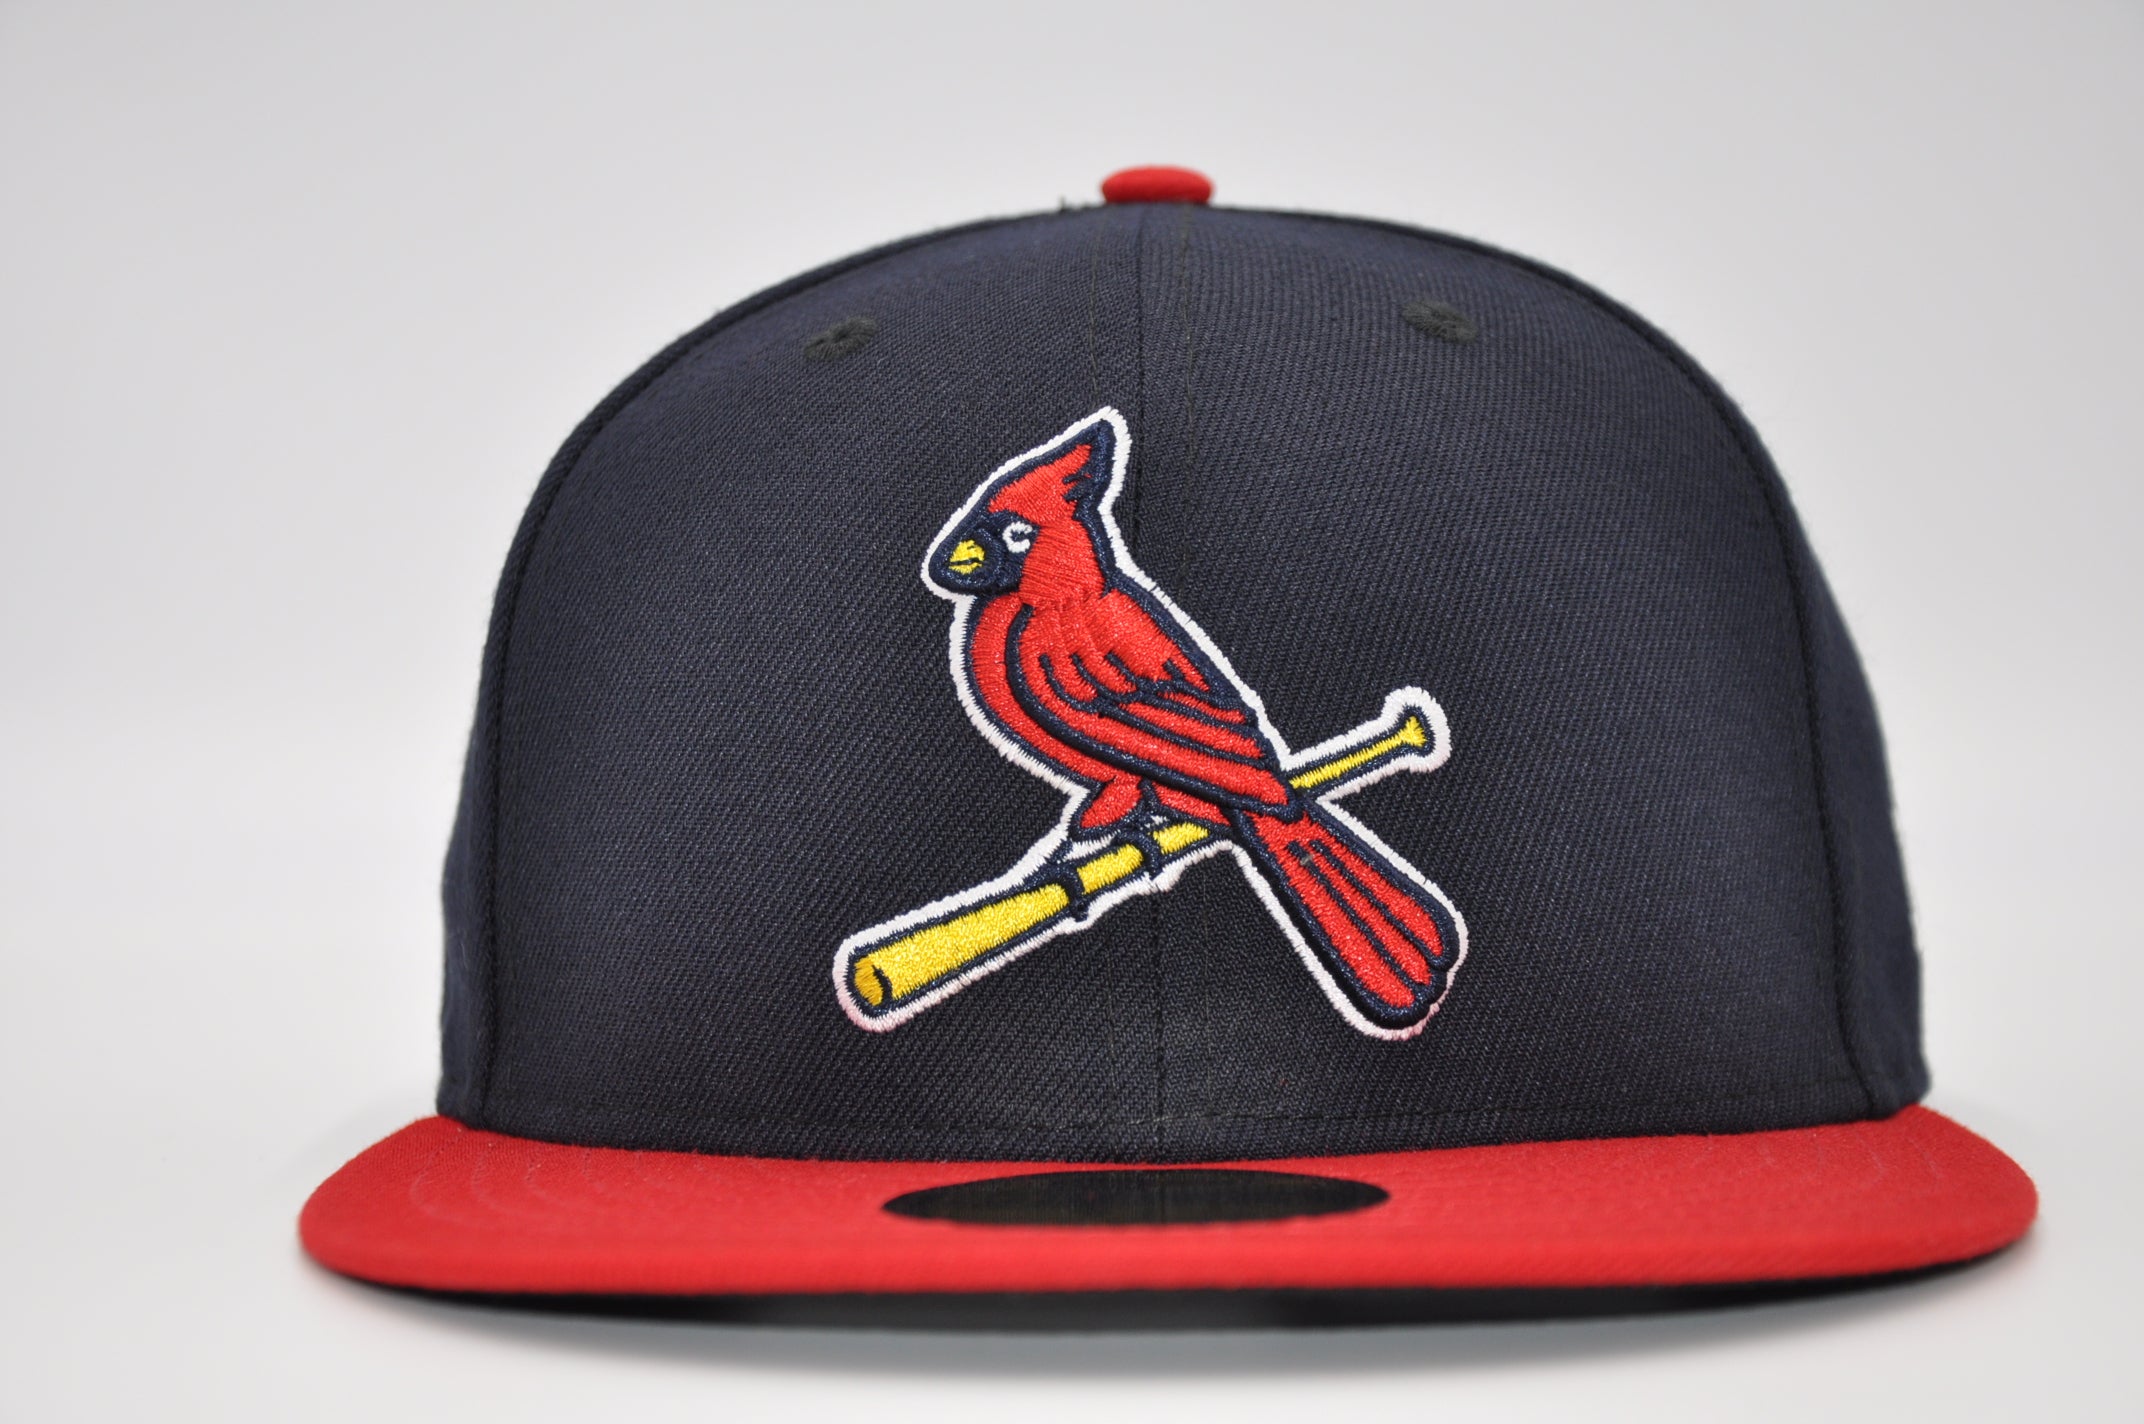 St. Louis Cardinals New Era Upside Down 59FIFTY Fitted Hat - Red